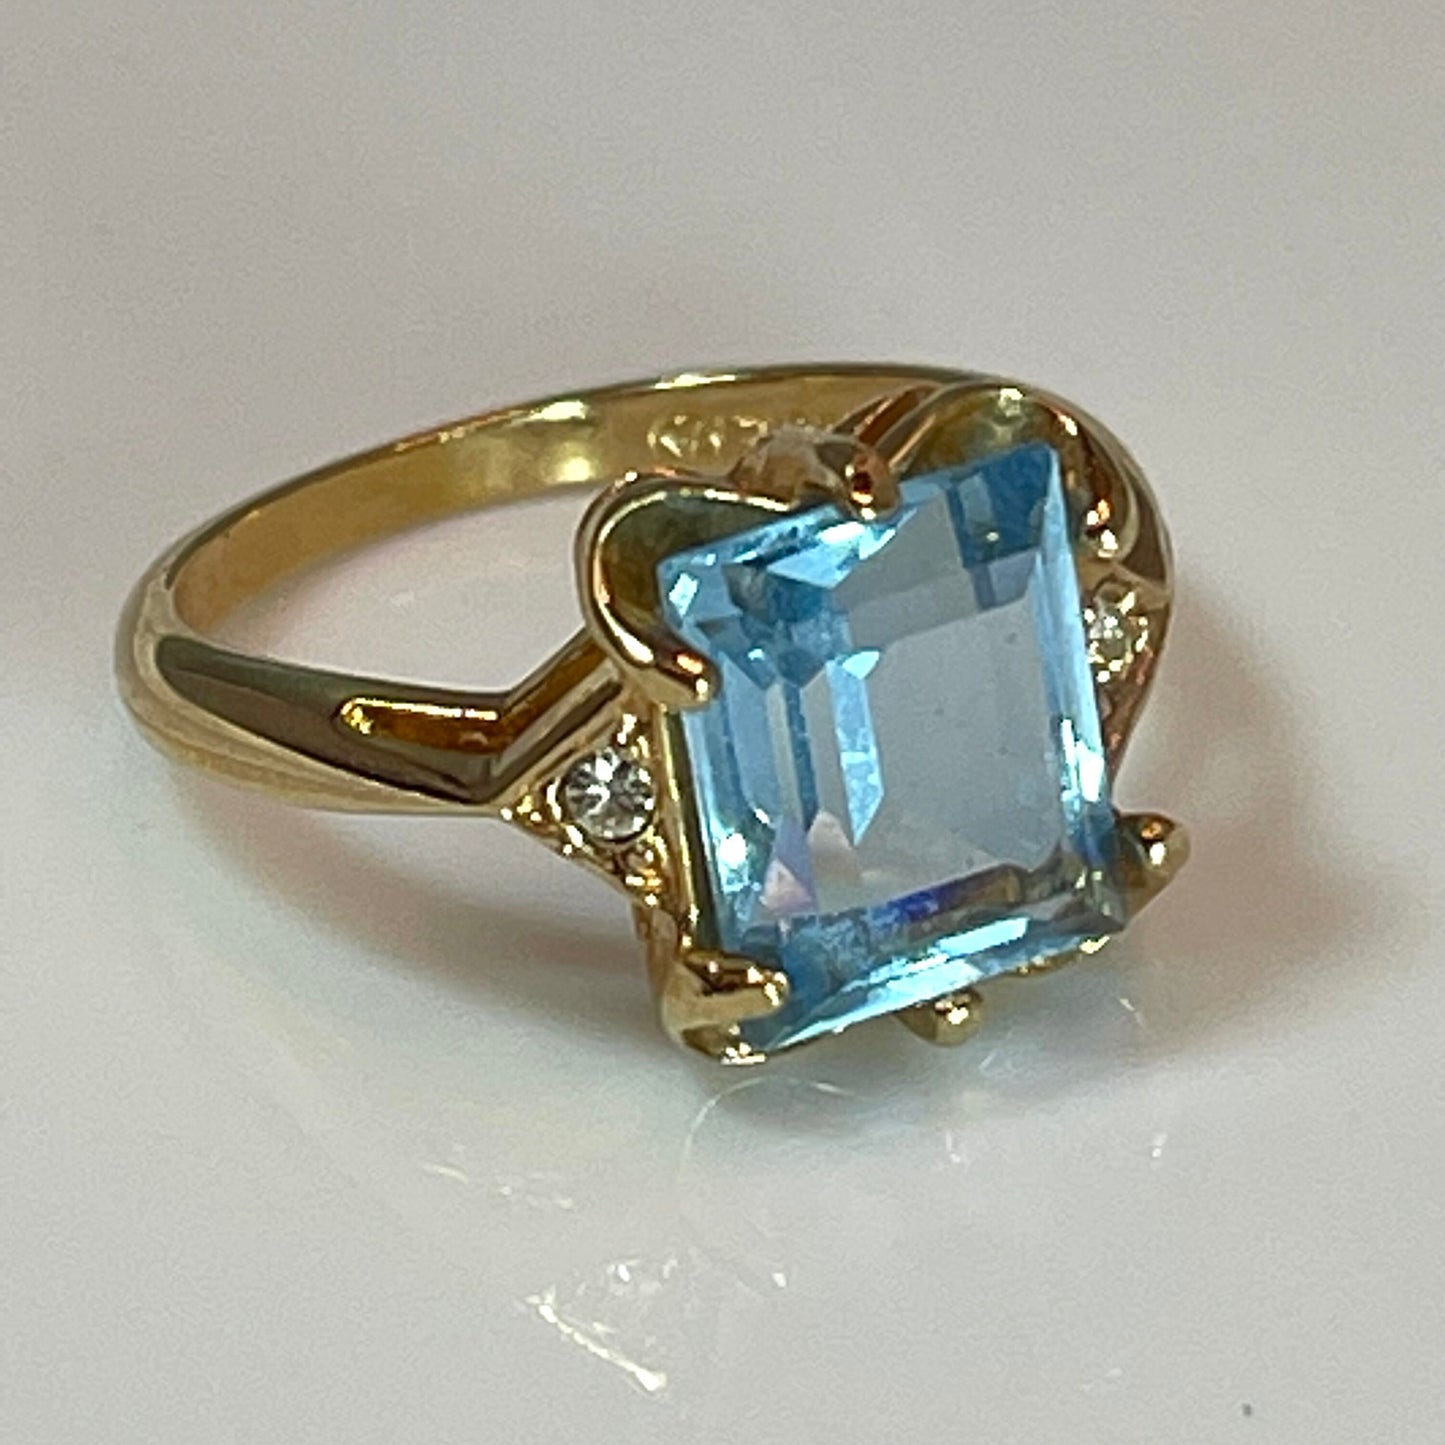 Vintage Ring Emerald Cut Blue Topaz Crystal 18kt Yellow Gold Eectroplated Ring December Birthstone